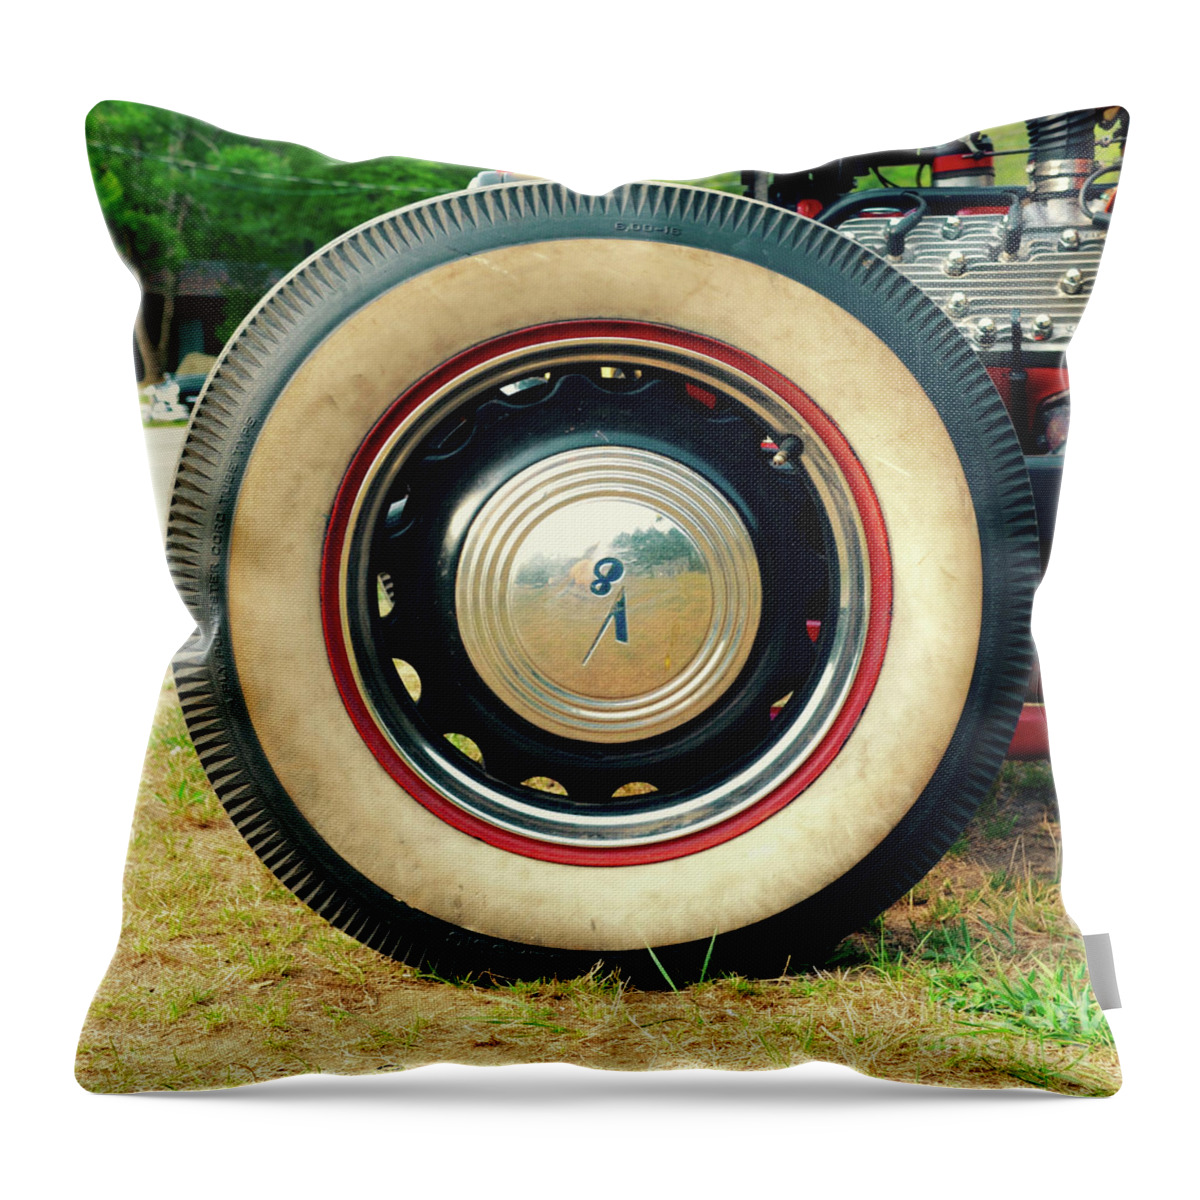 Cars Throw Pillow featuring the photograph V8 Hot Rod Tire by Jason Freedman